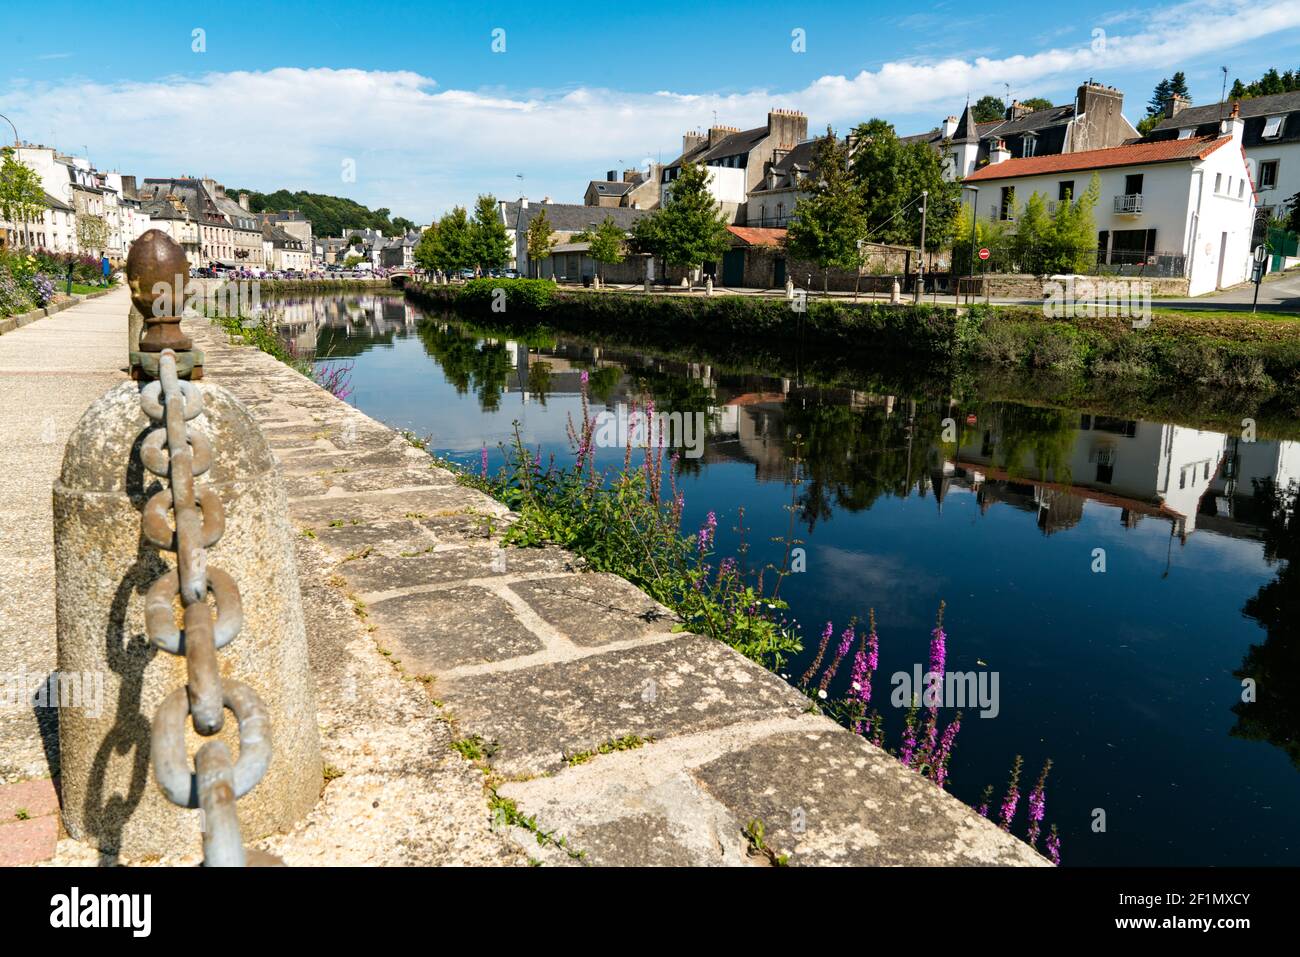 The river Laita and smalltown of Quimperle in southern Brittany Stock Photo